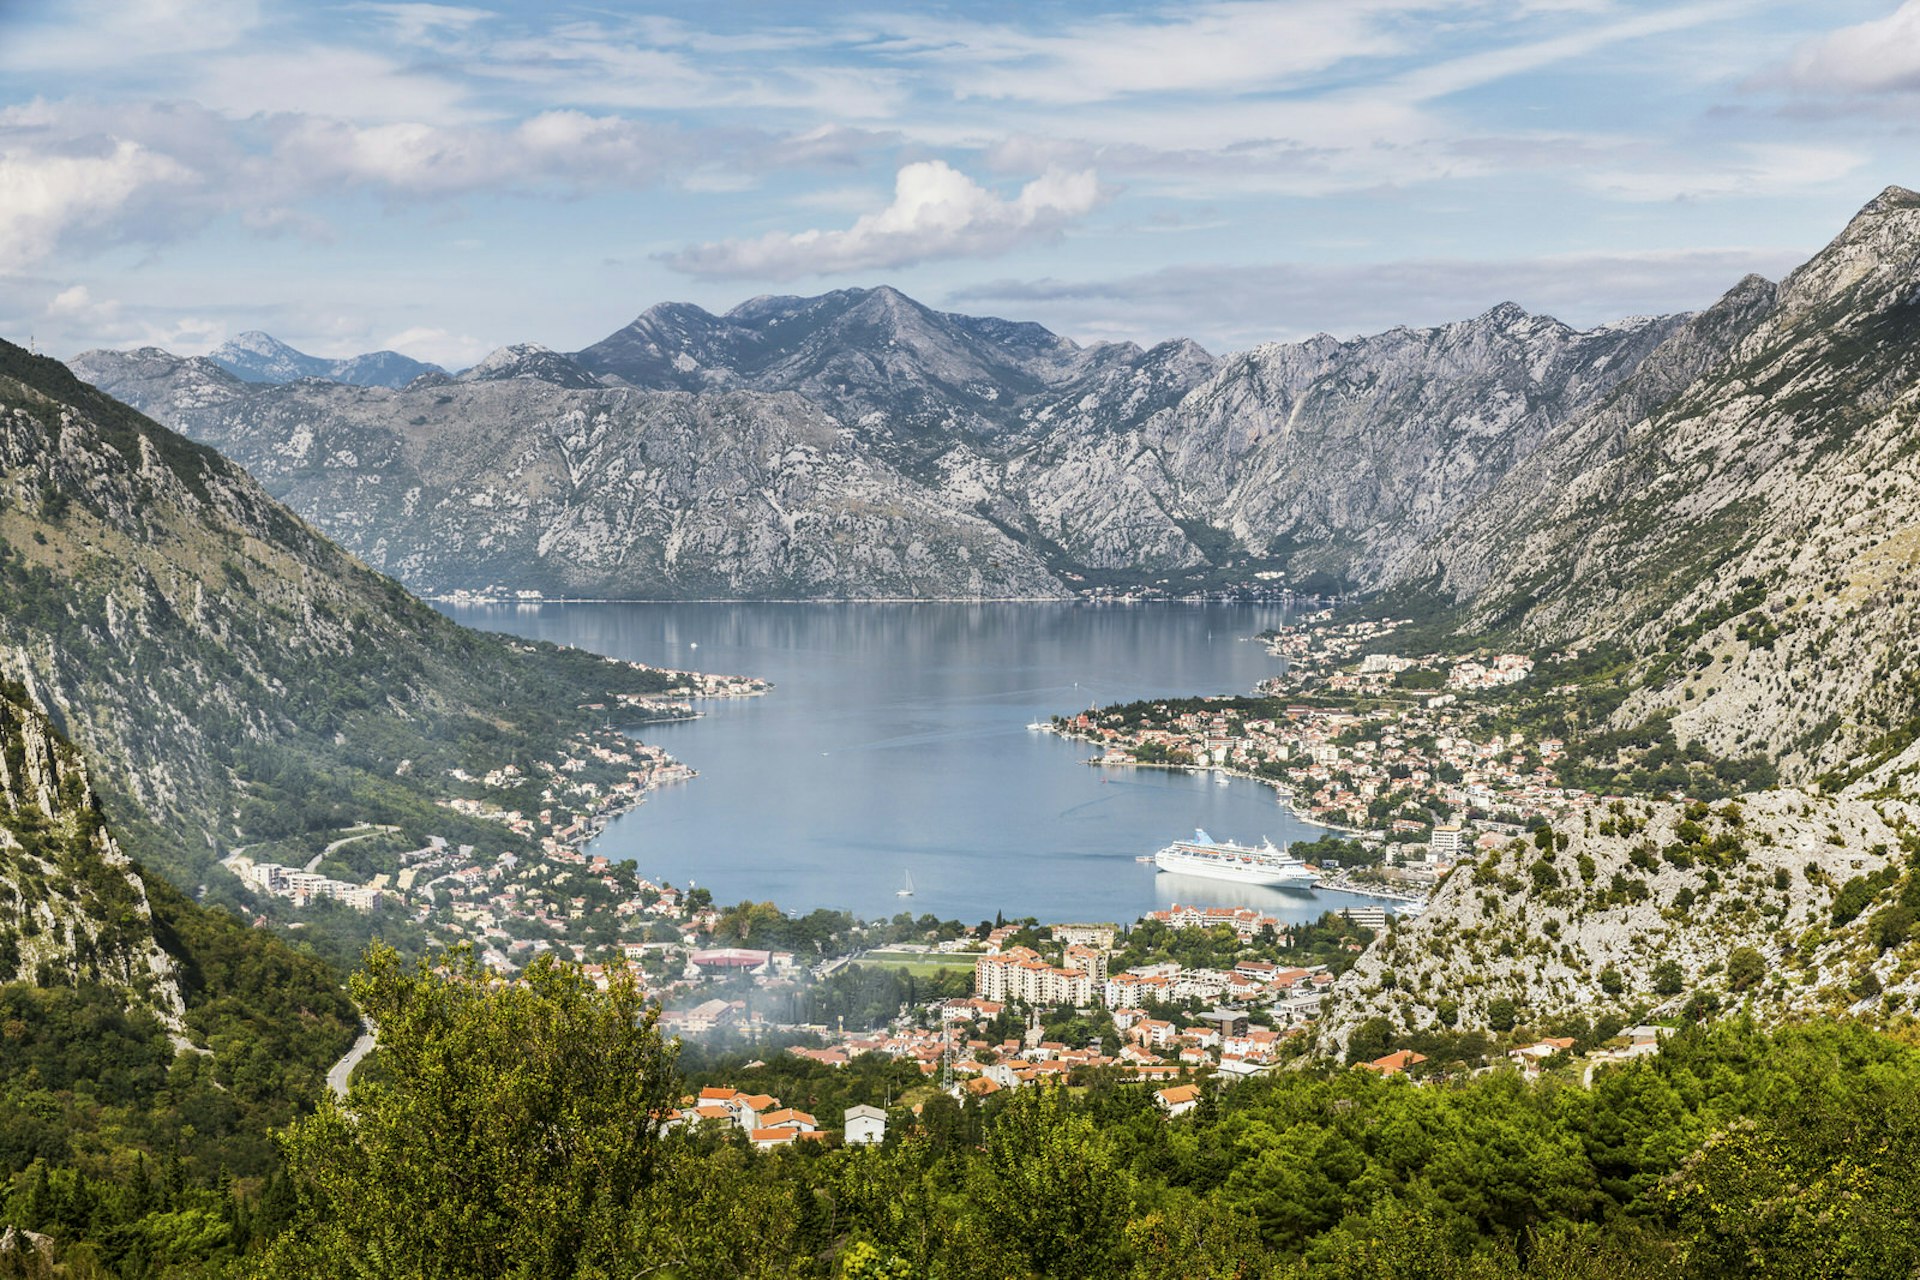 The impressive view across the Bay of Kotor © Julian Love / Lonely Planet